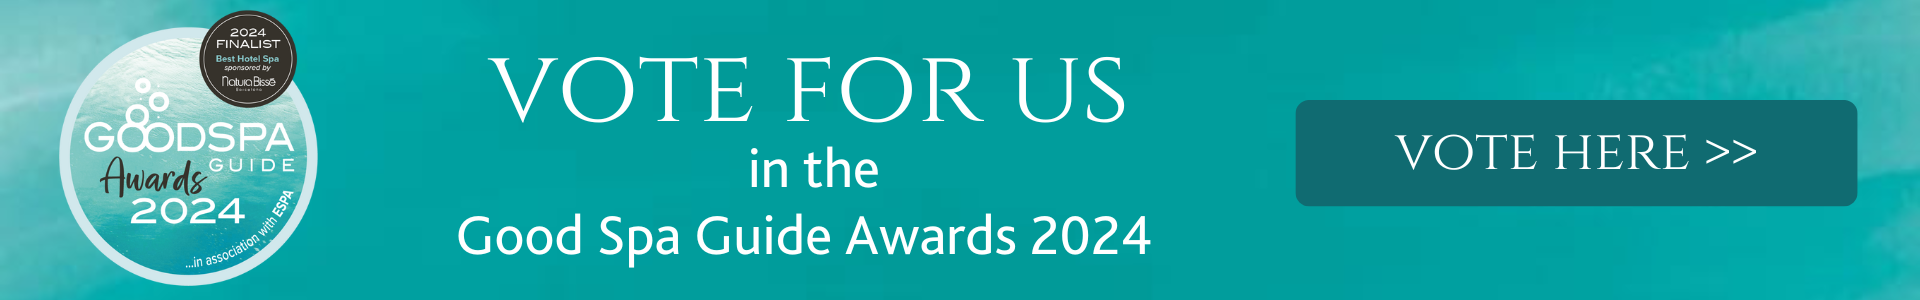 Vote for us at the Good Spa Guide Awards 2024!